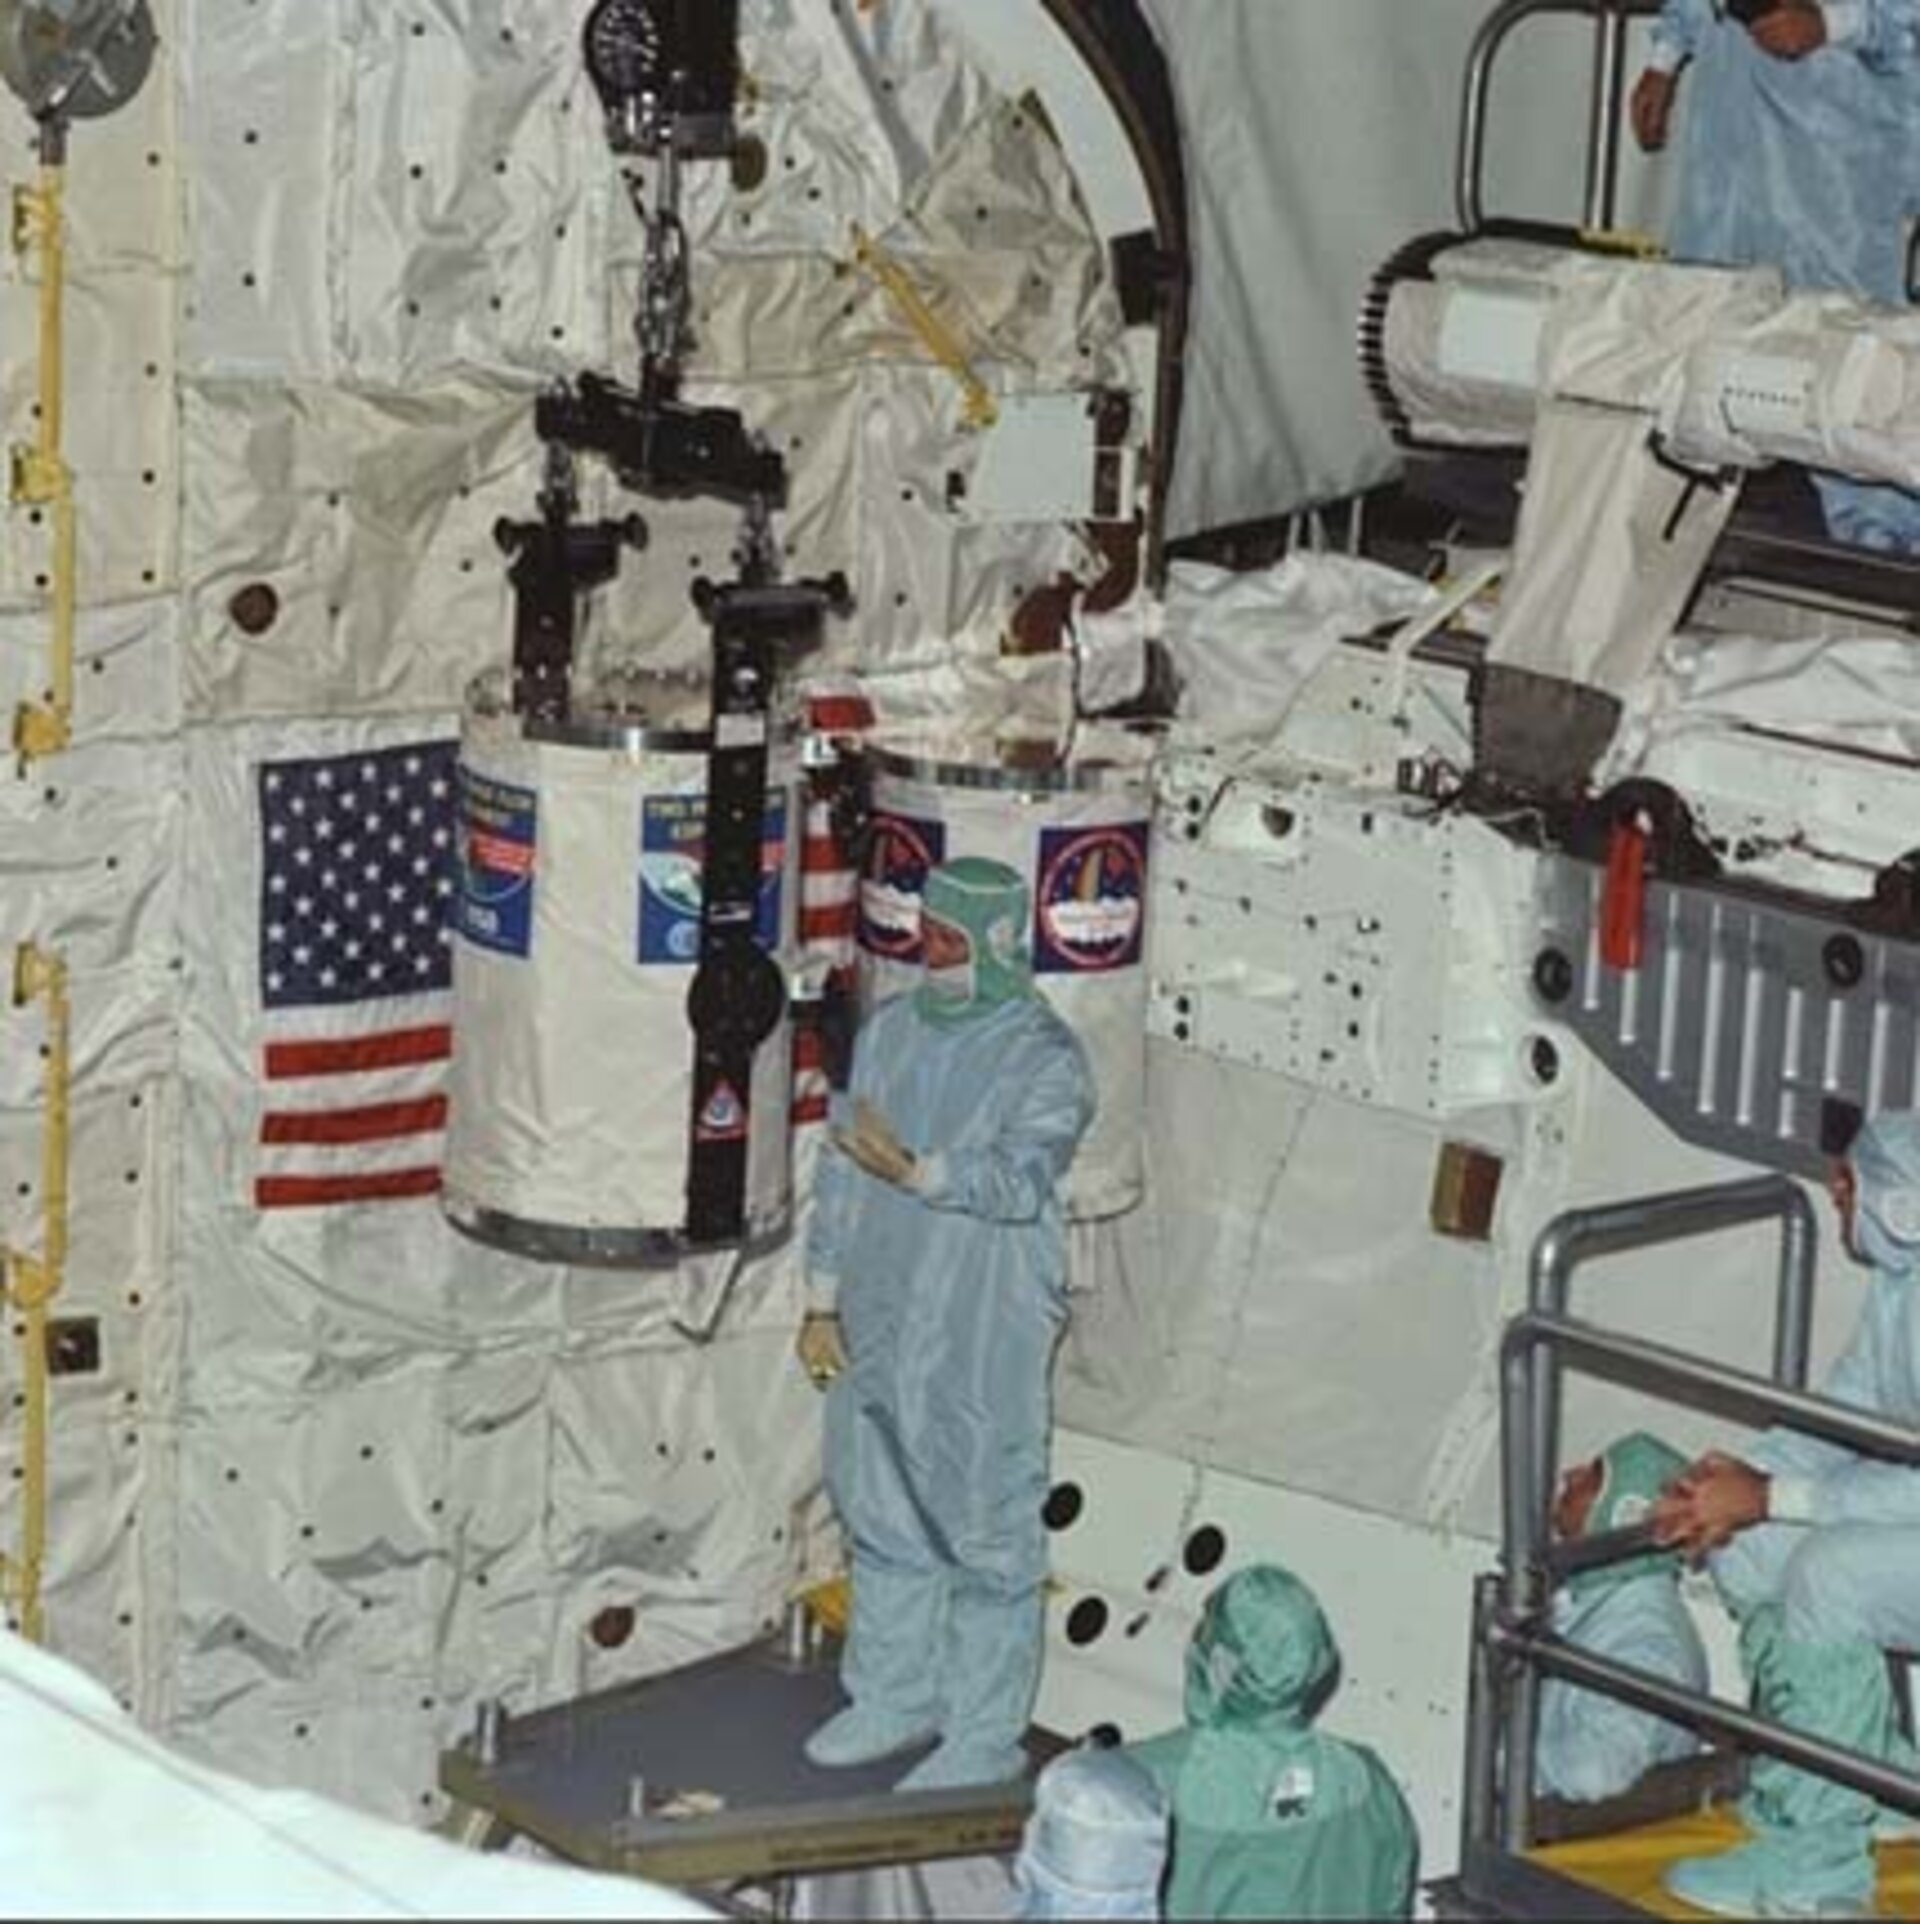 Integration of TPX-II experiment in STS-95